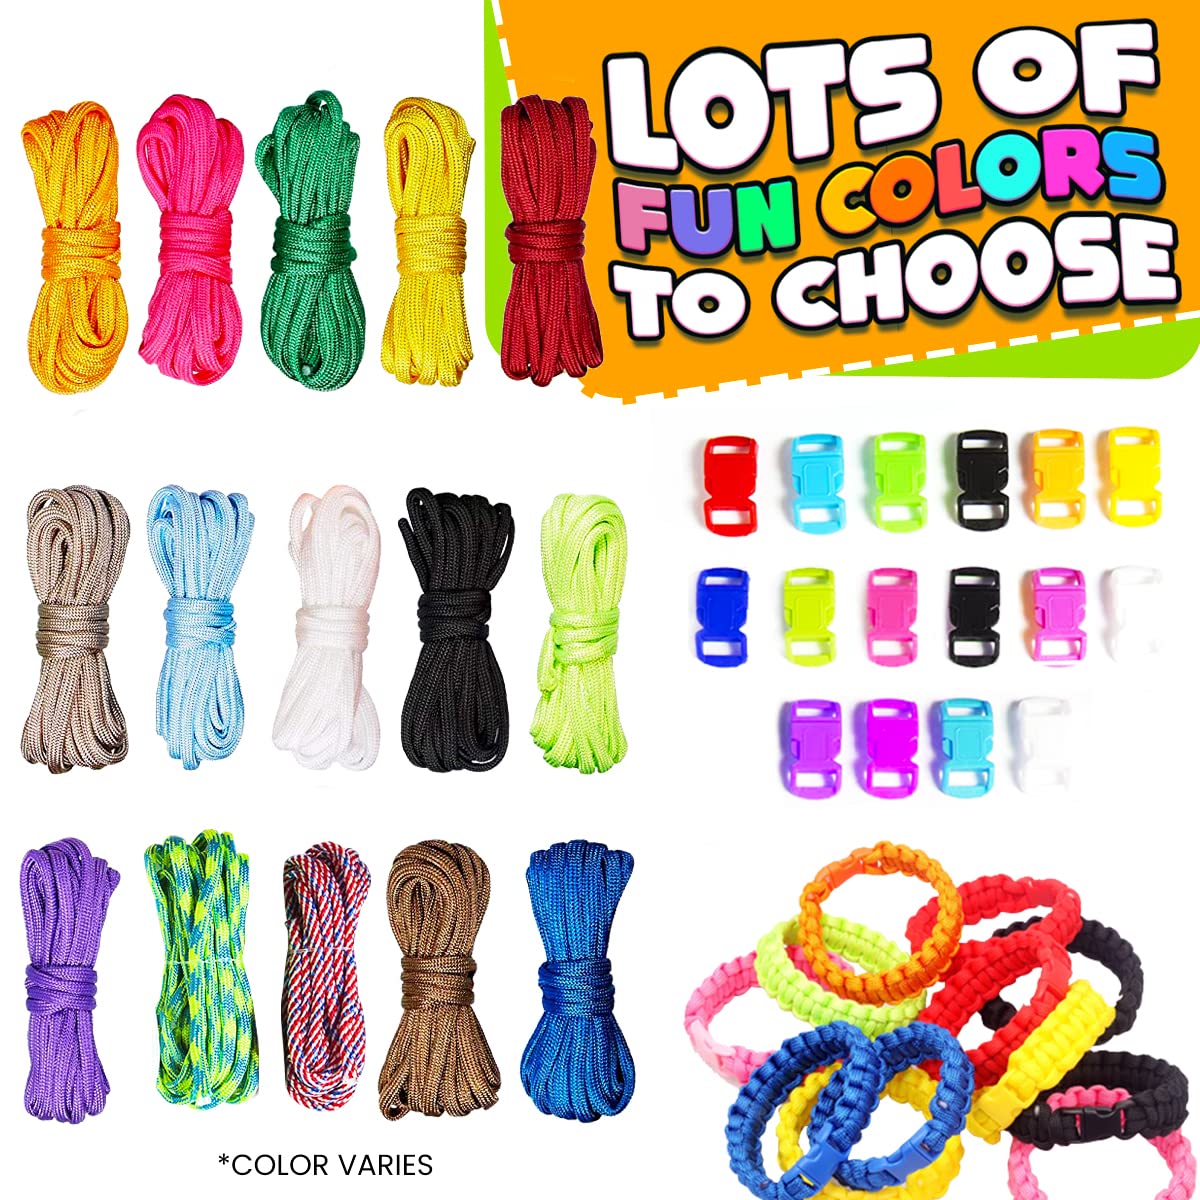 Innorock Paracord Friendship Bracelets Kit for Kids - Make Your Own Rope Bracelet with Charms for Boys and Girls Age 6 7 8 9 10 11 12 Years Old - DIY Arts and Crafts Activity for Teens Stuff